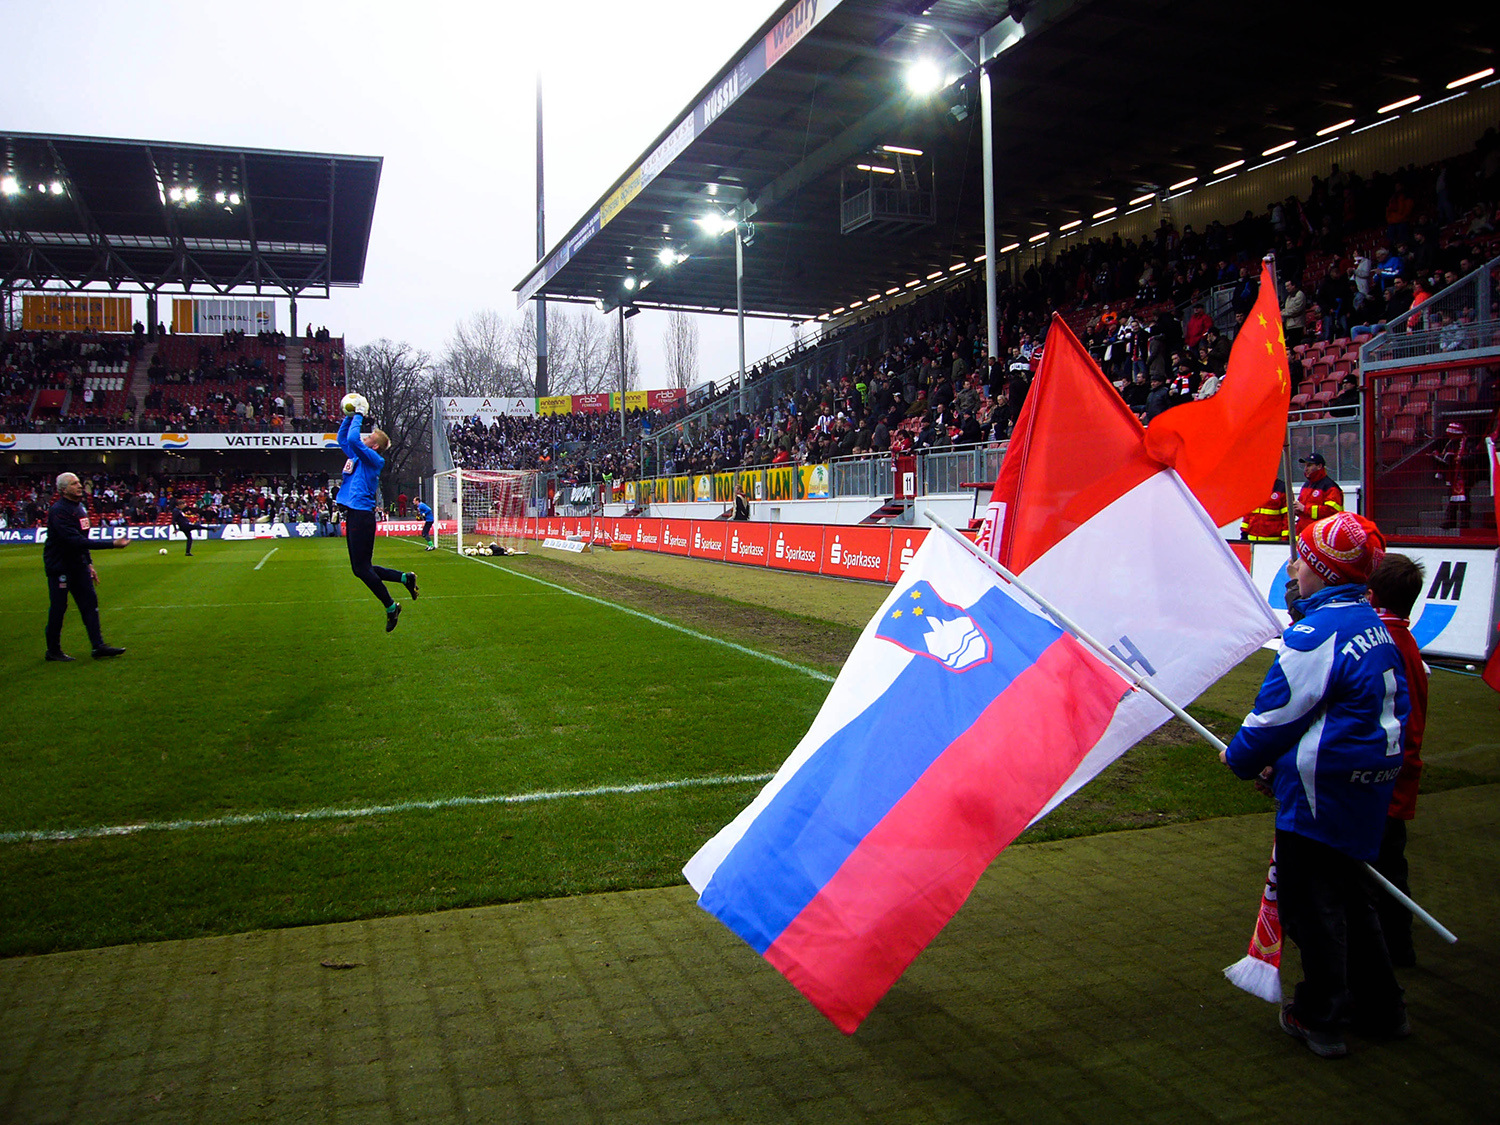 <p>Flagbearers watching the warm-ups at a 2009 match between Energie Cottbus and Hertha BSC in the Stadion der Freundschaft.<br /></p>
